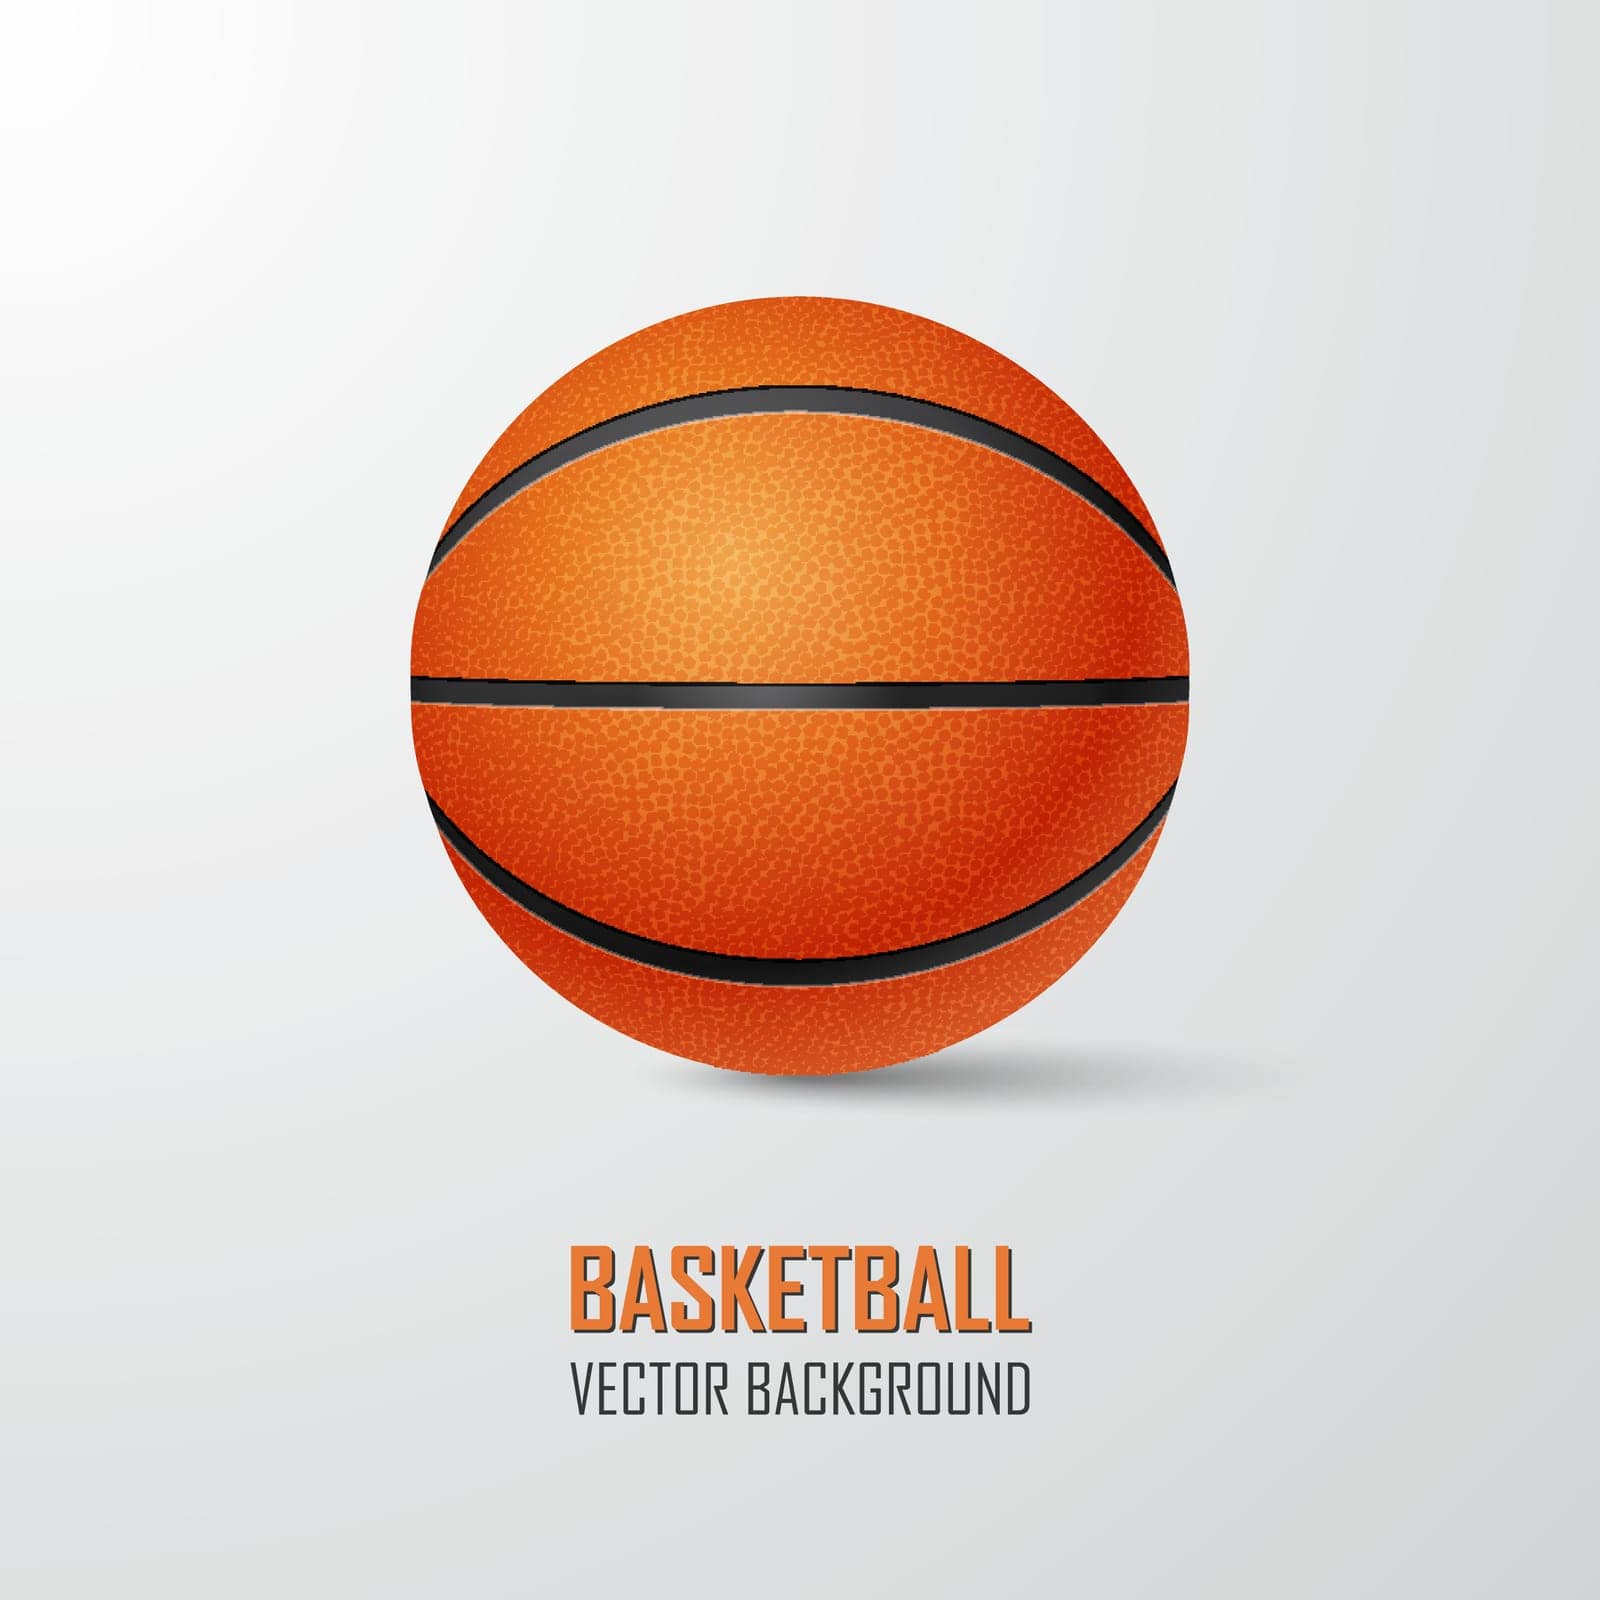 Basketball background with place for text- single ball on a light background. Vector EPS10 illustration.